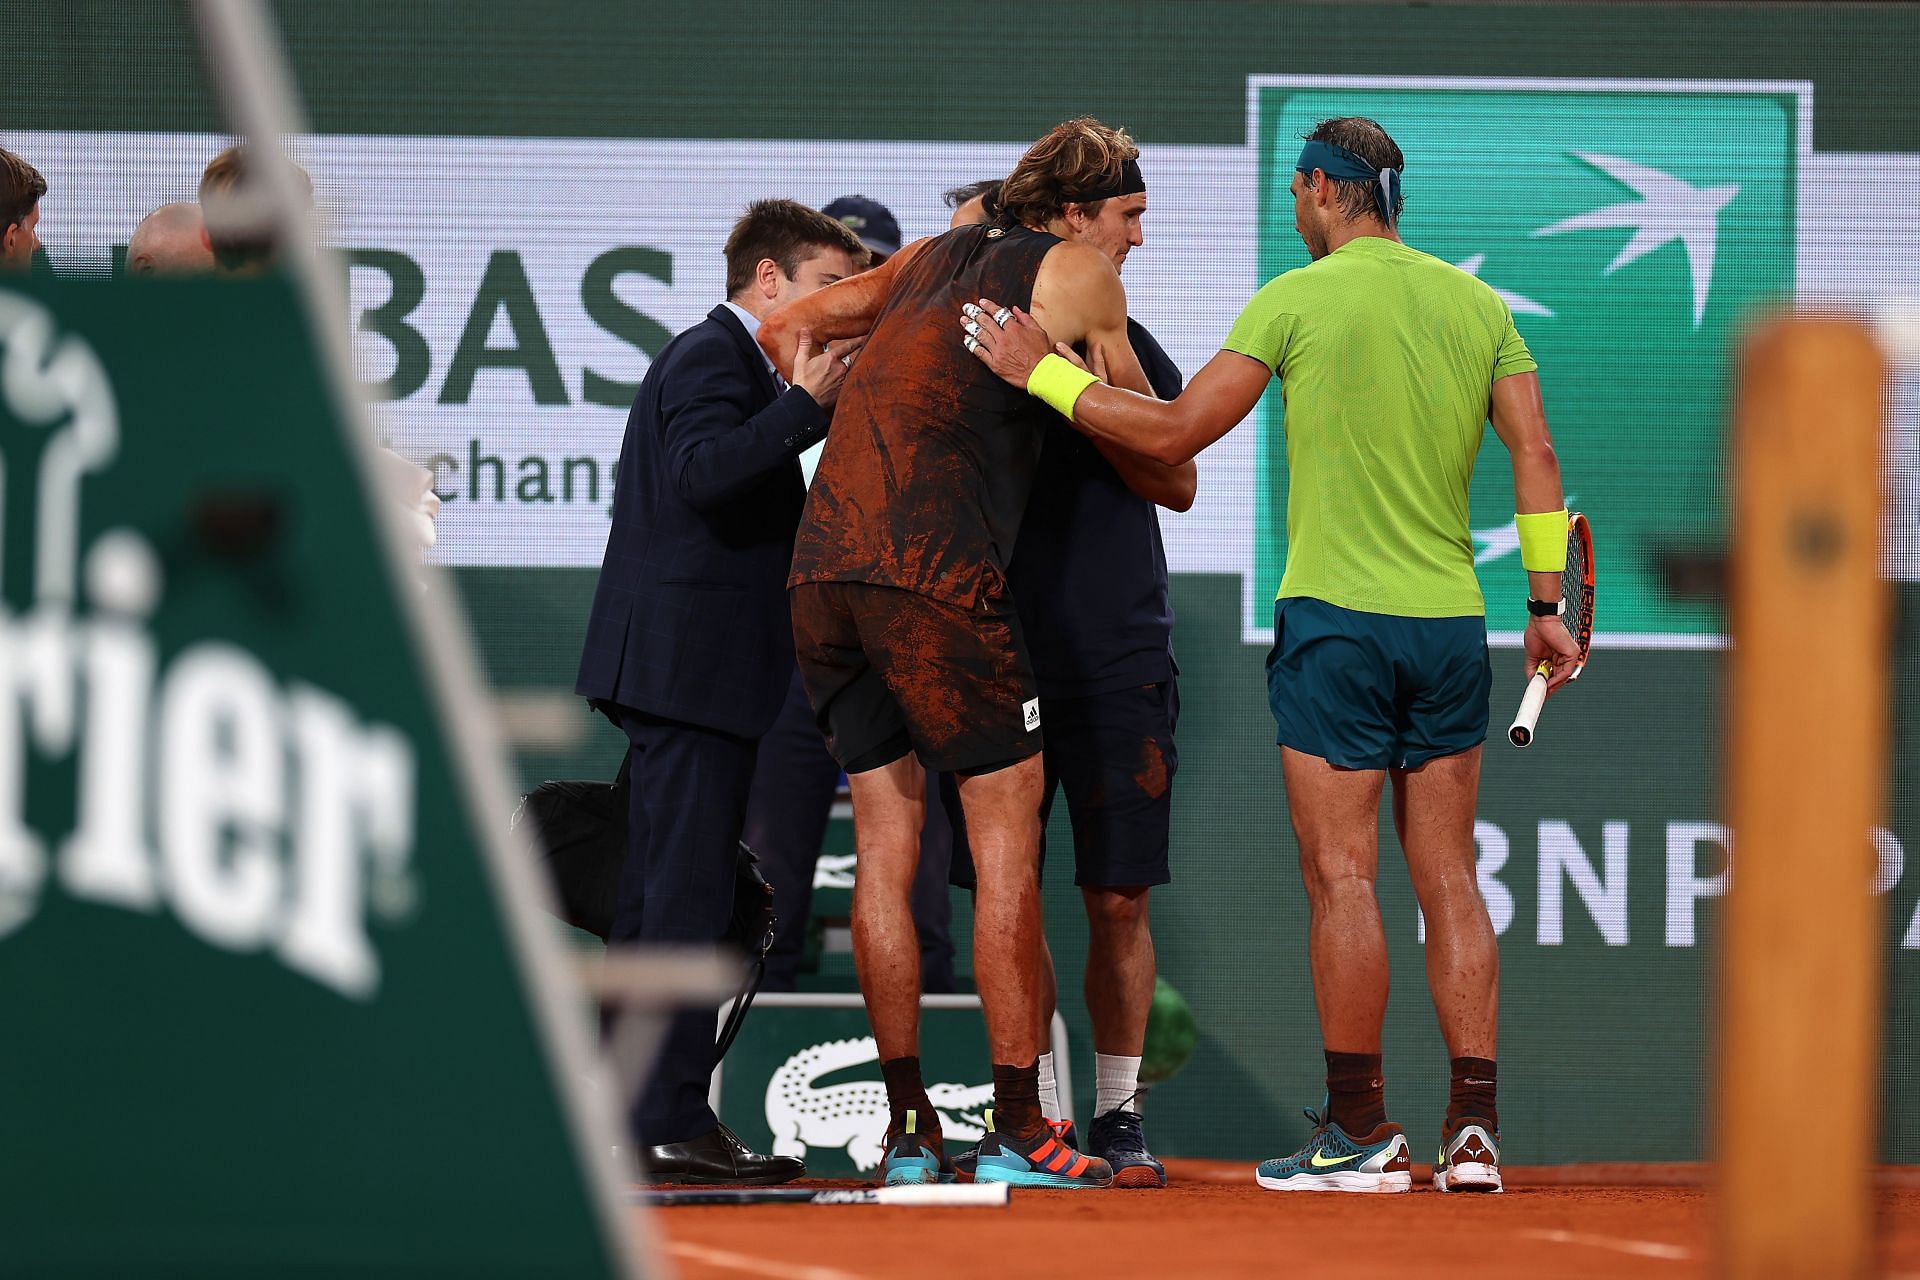 Rafael Nadal was quick to wish Alexander Zverev a speedy recovery as well